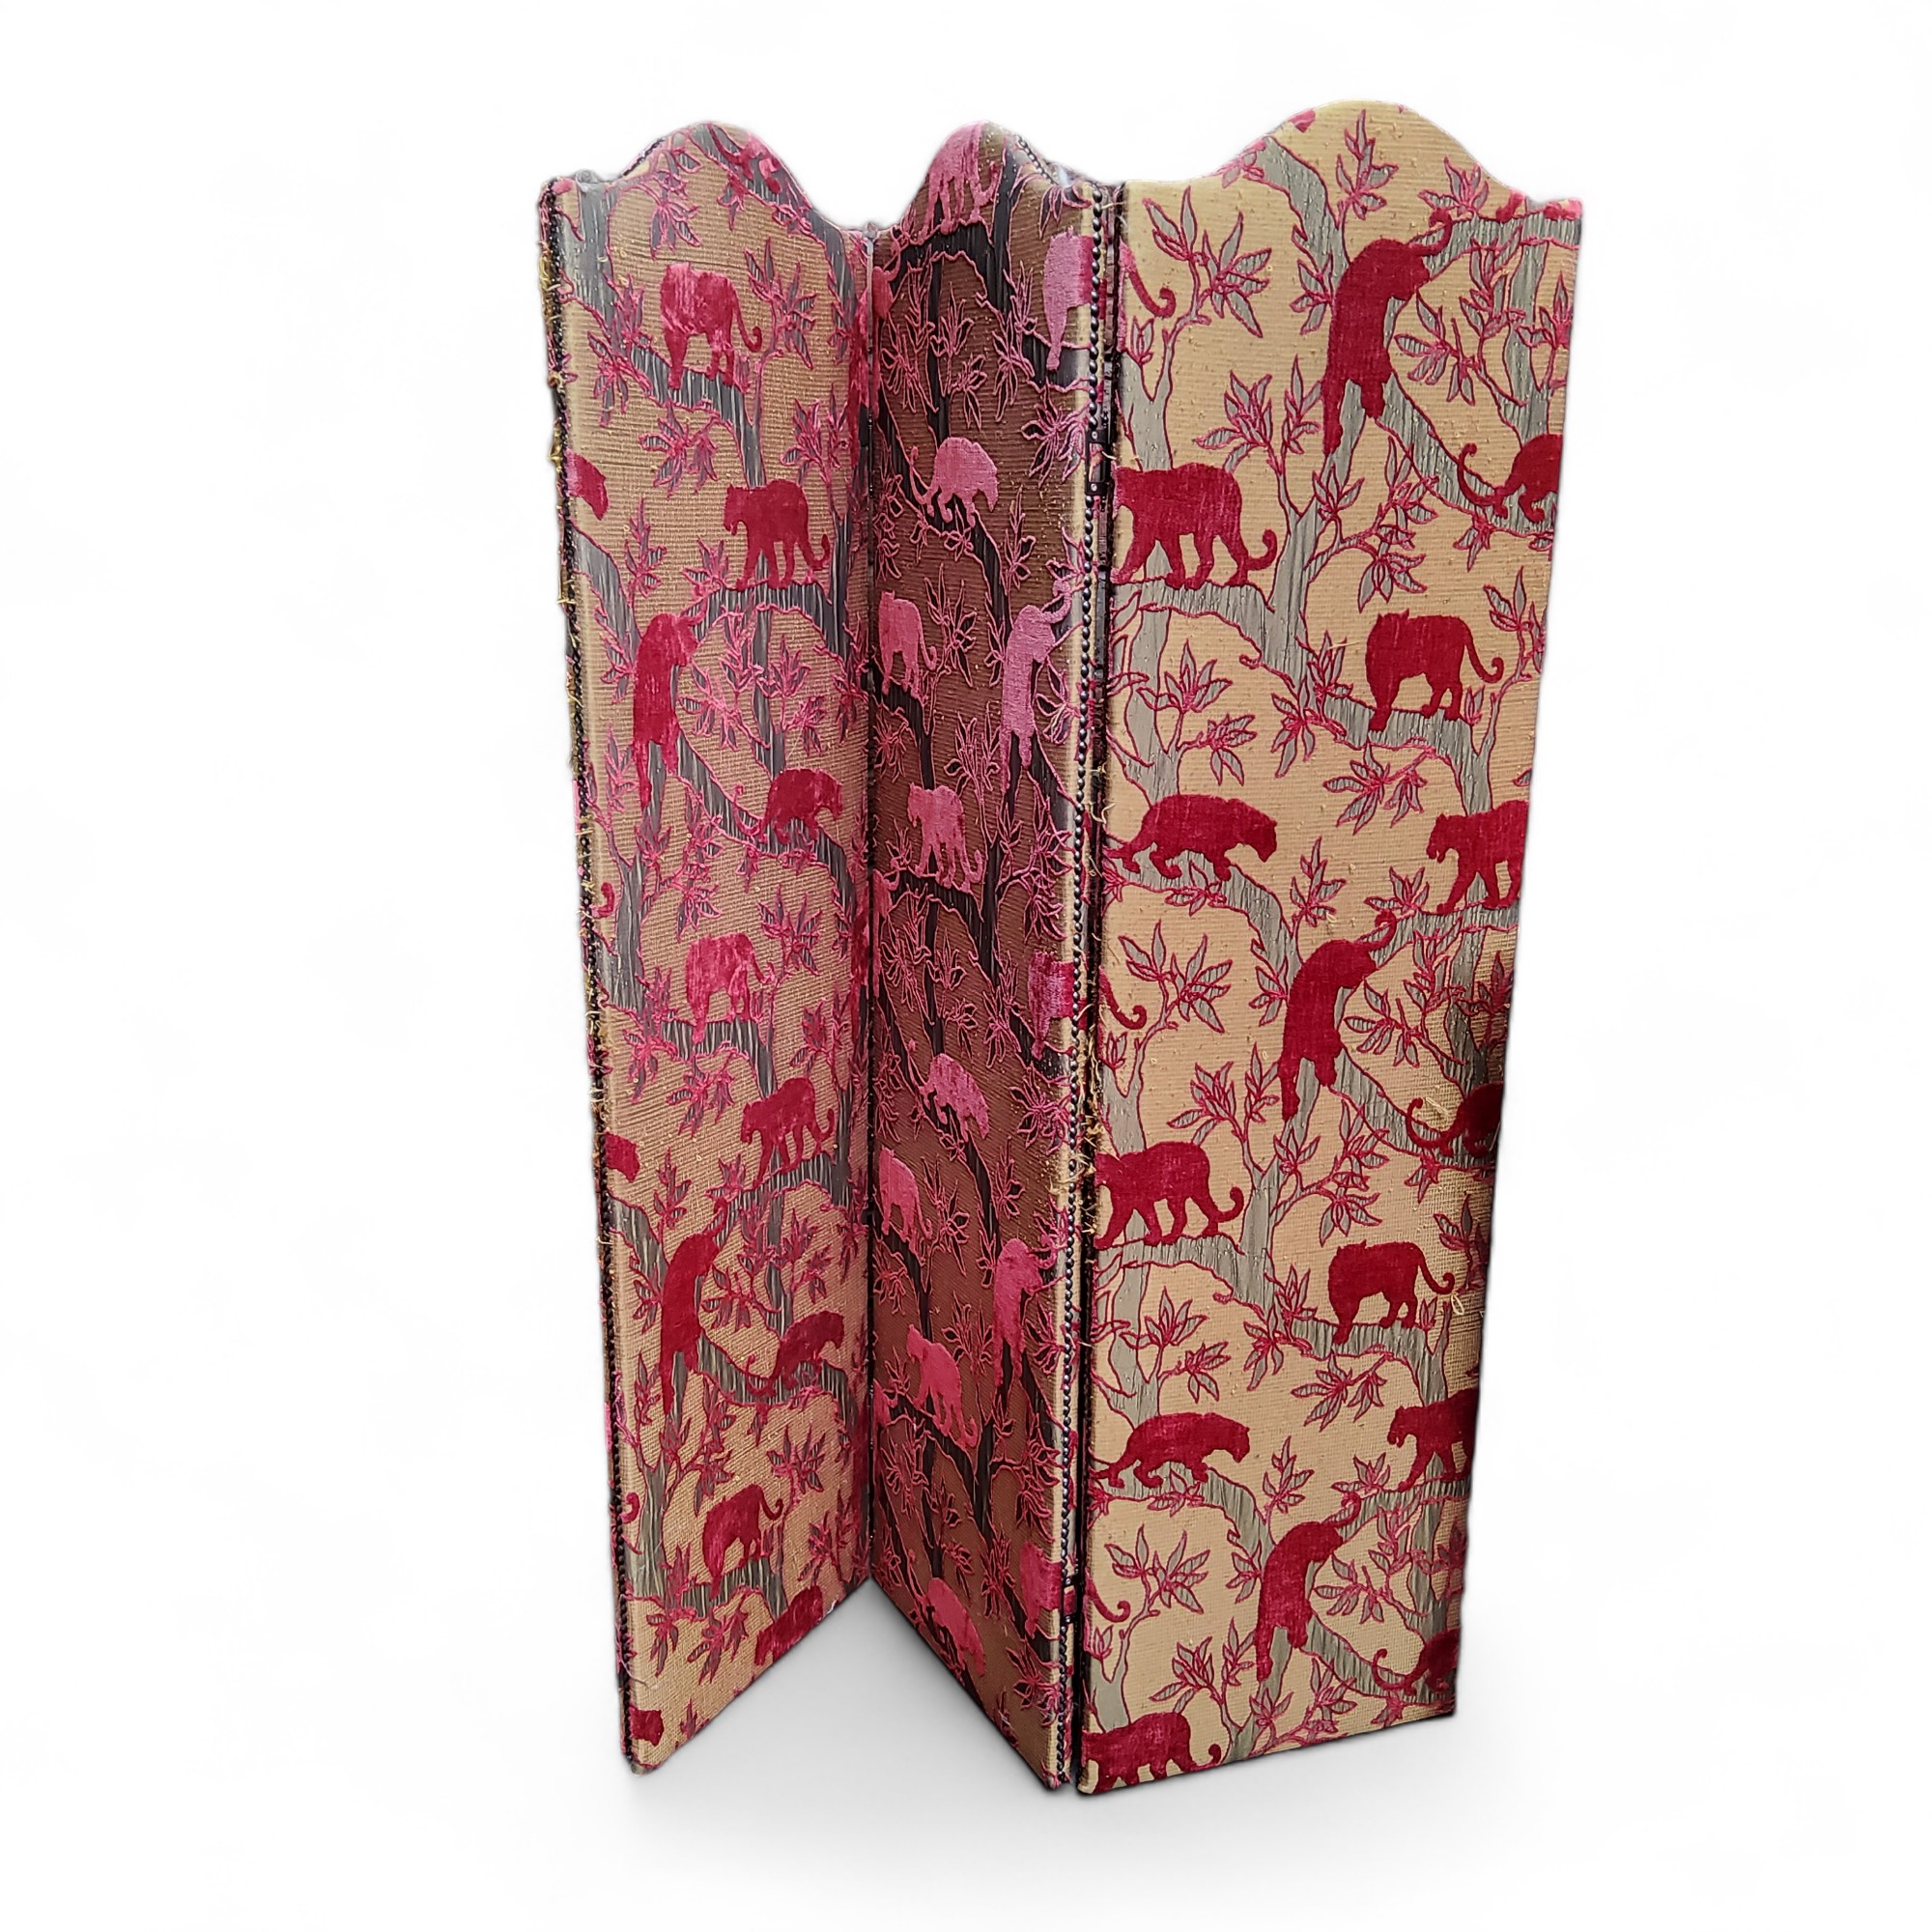 A three fold modesty screen with panther pattern fabric, 126cm wide